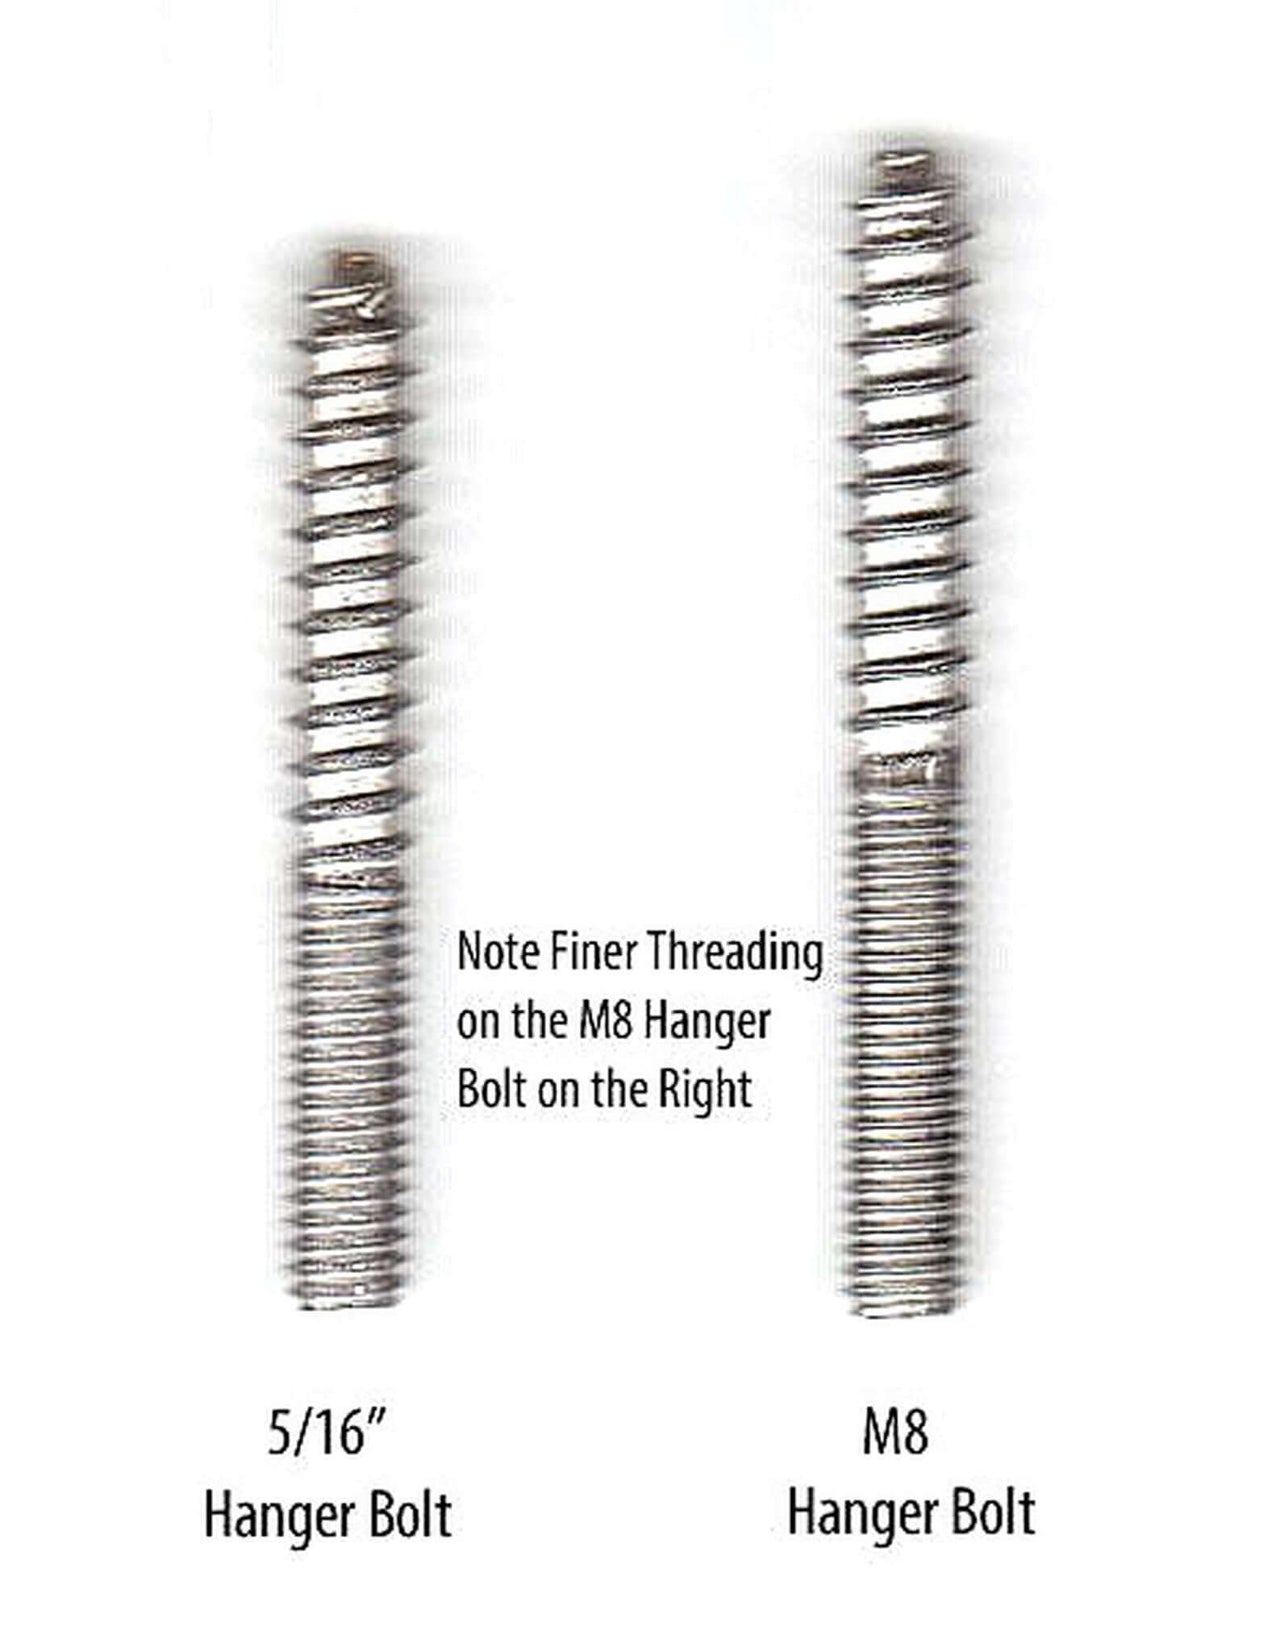 Leg Daddy 6" Tapered ABS Leg, M8 Hanger Bolt (Set of 2 ) Includes M8 T-Nuts